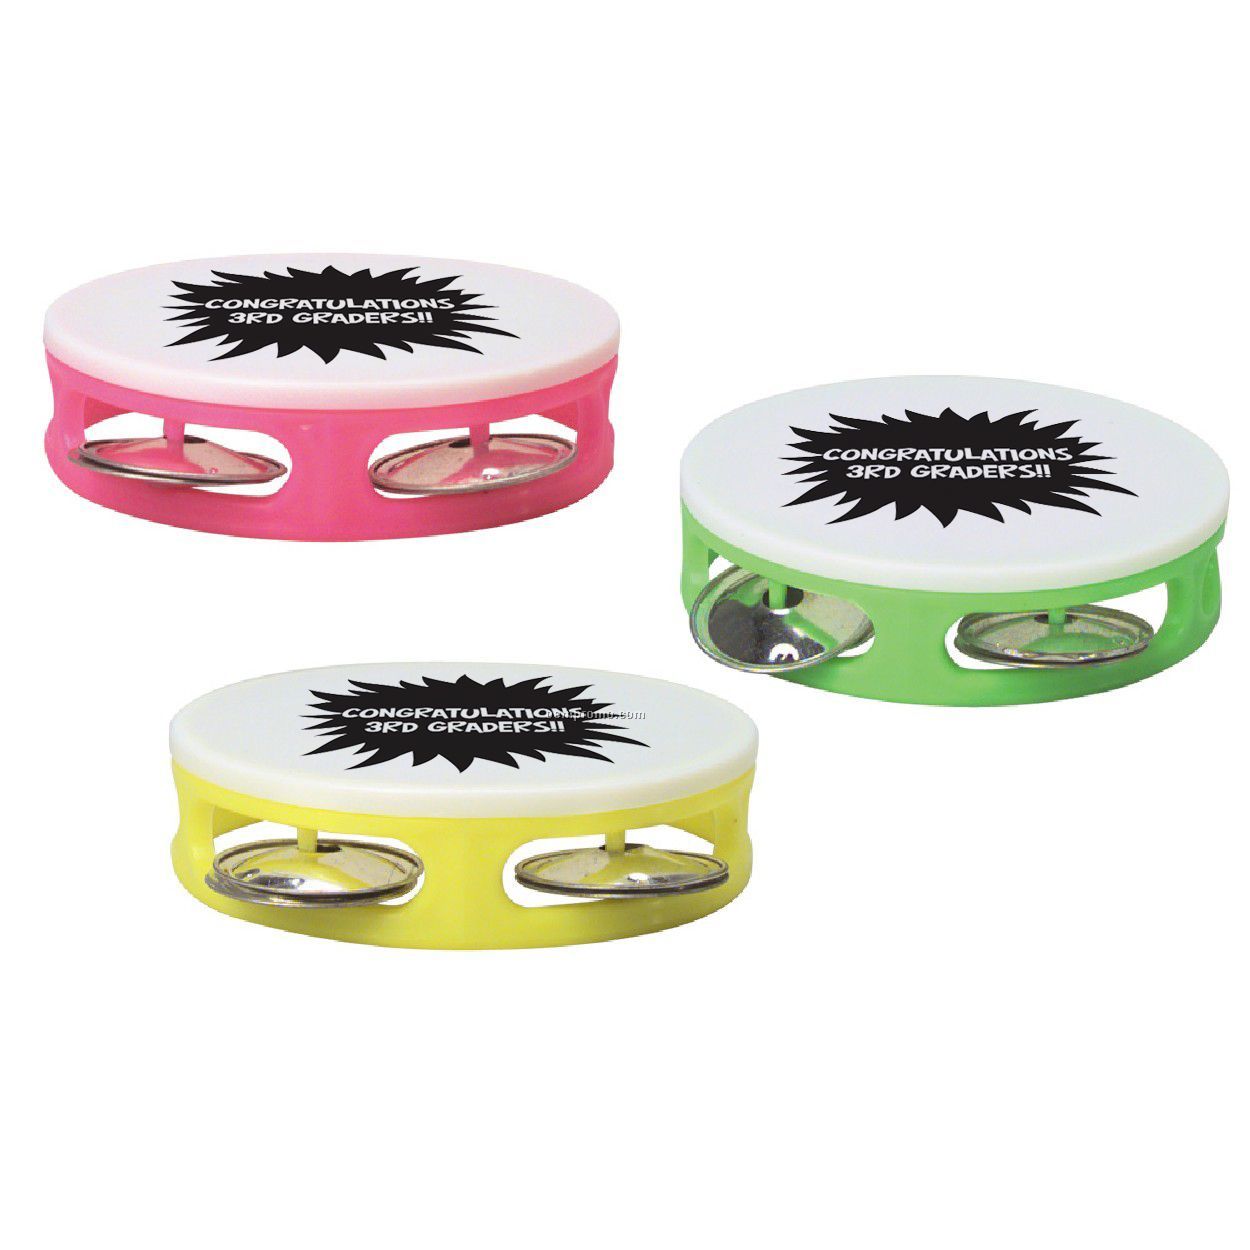 Tambourine With Neon Sides And White Top, 3 1/2